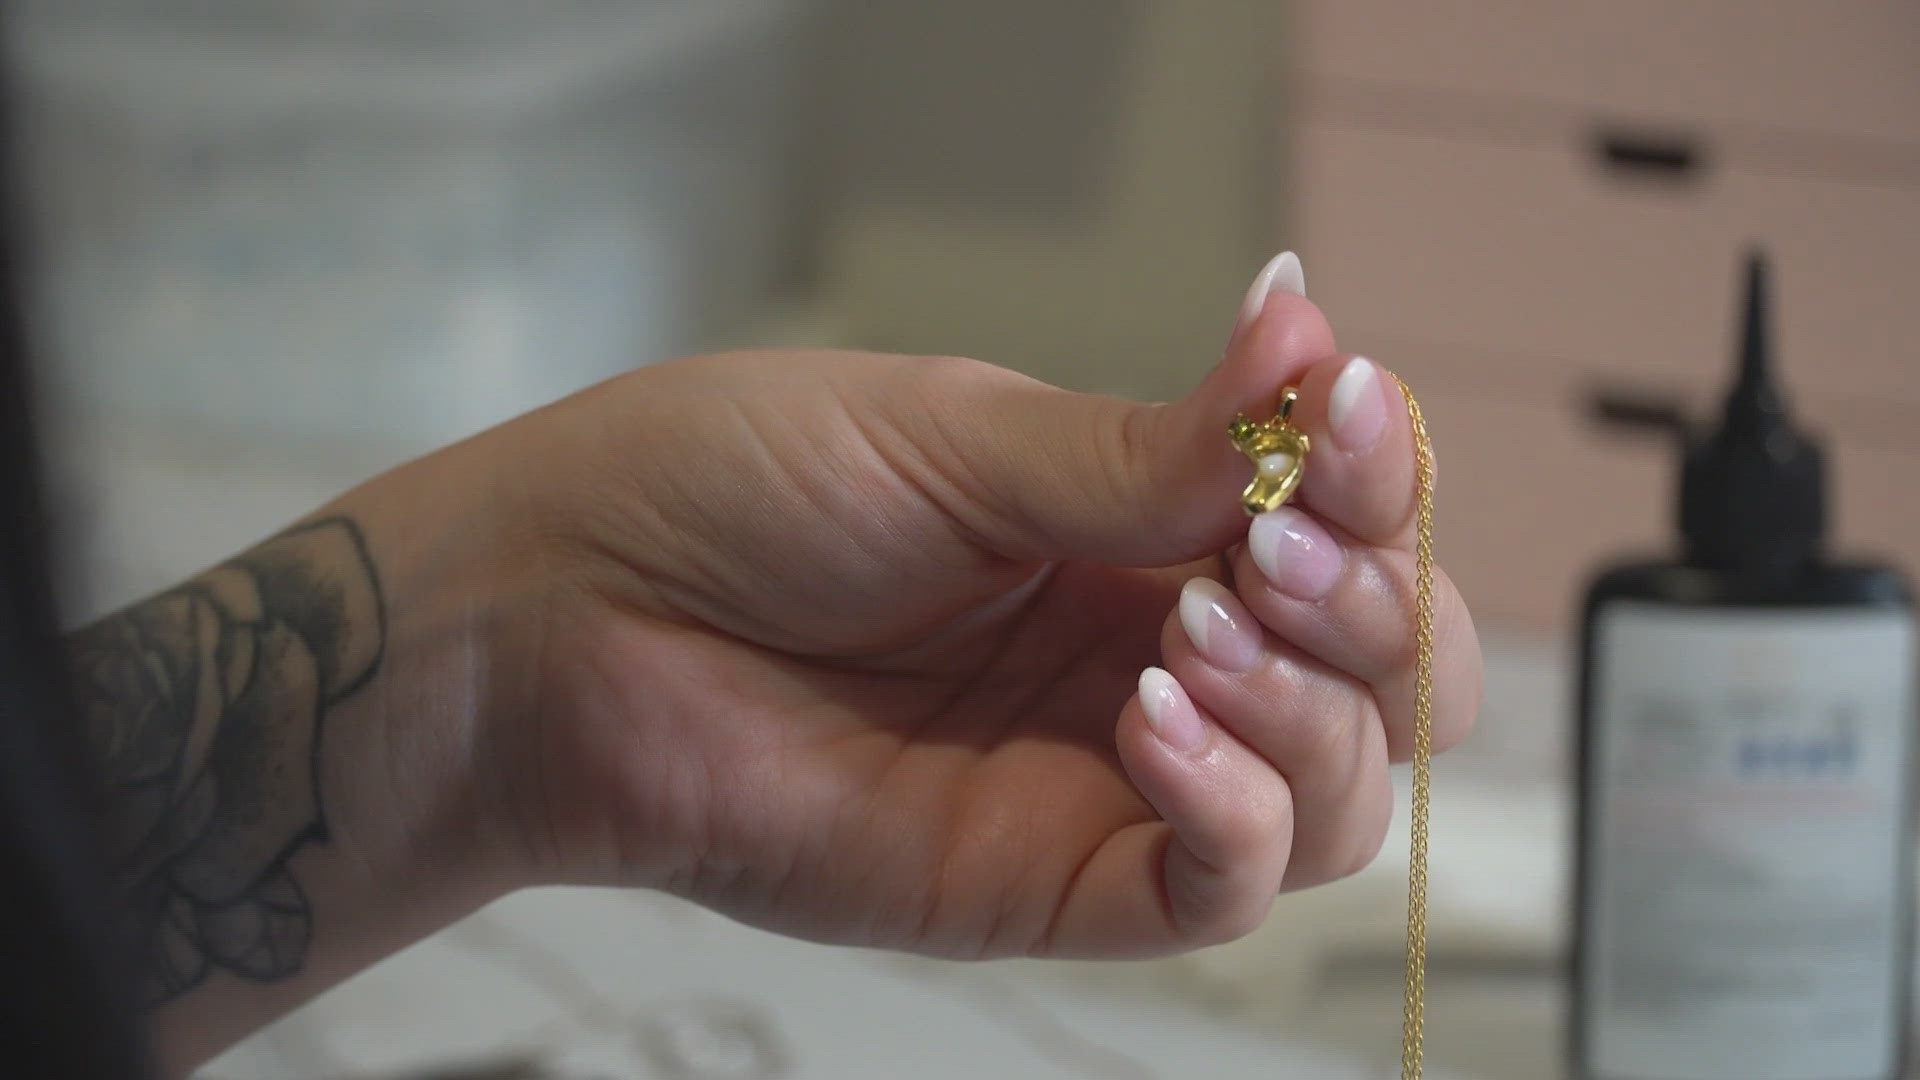 The jewelry helps moms preserve the special experience of breast feeding.